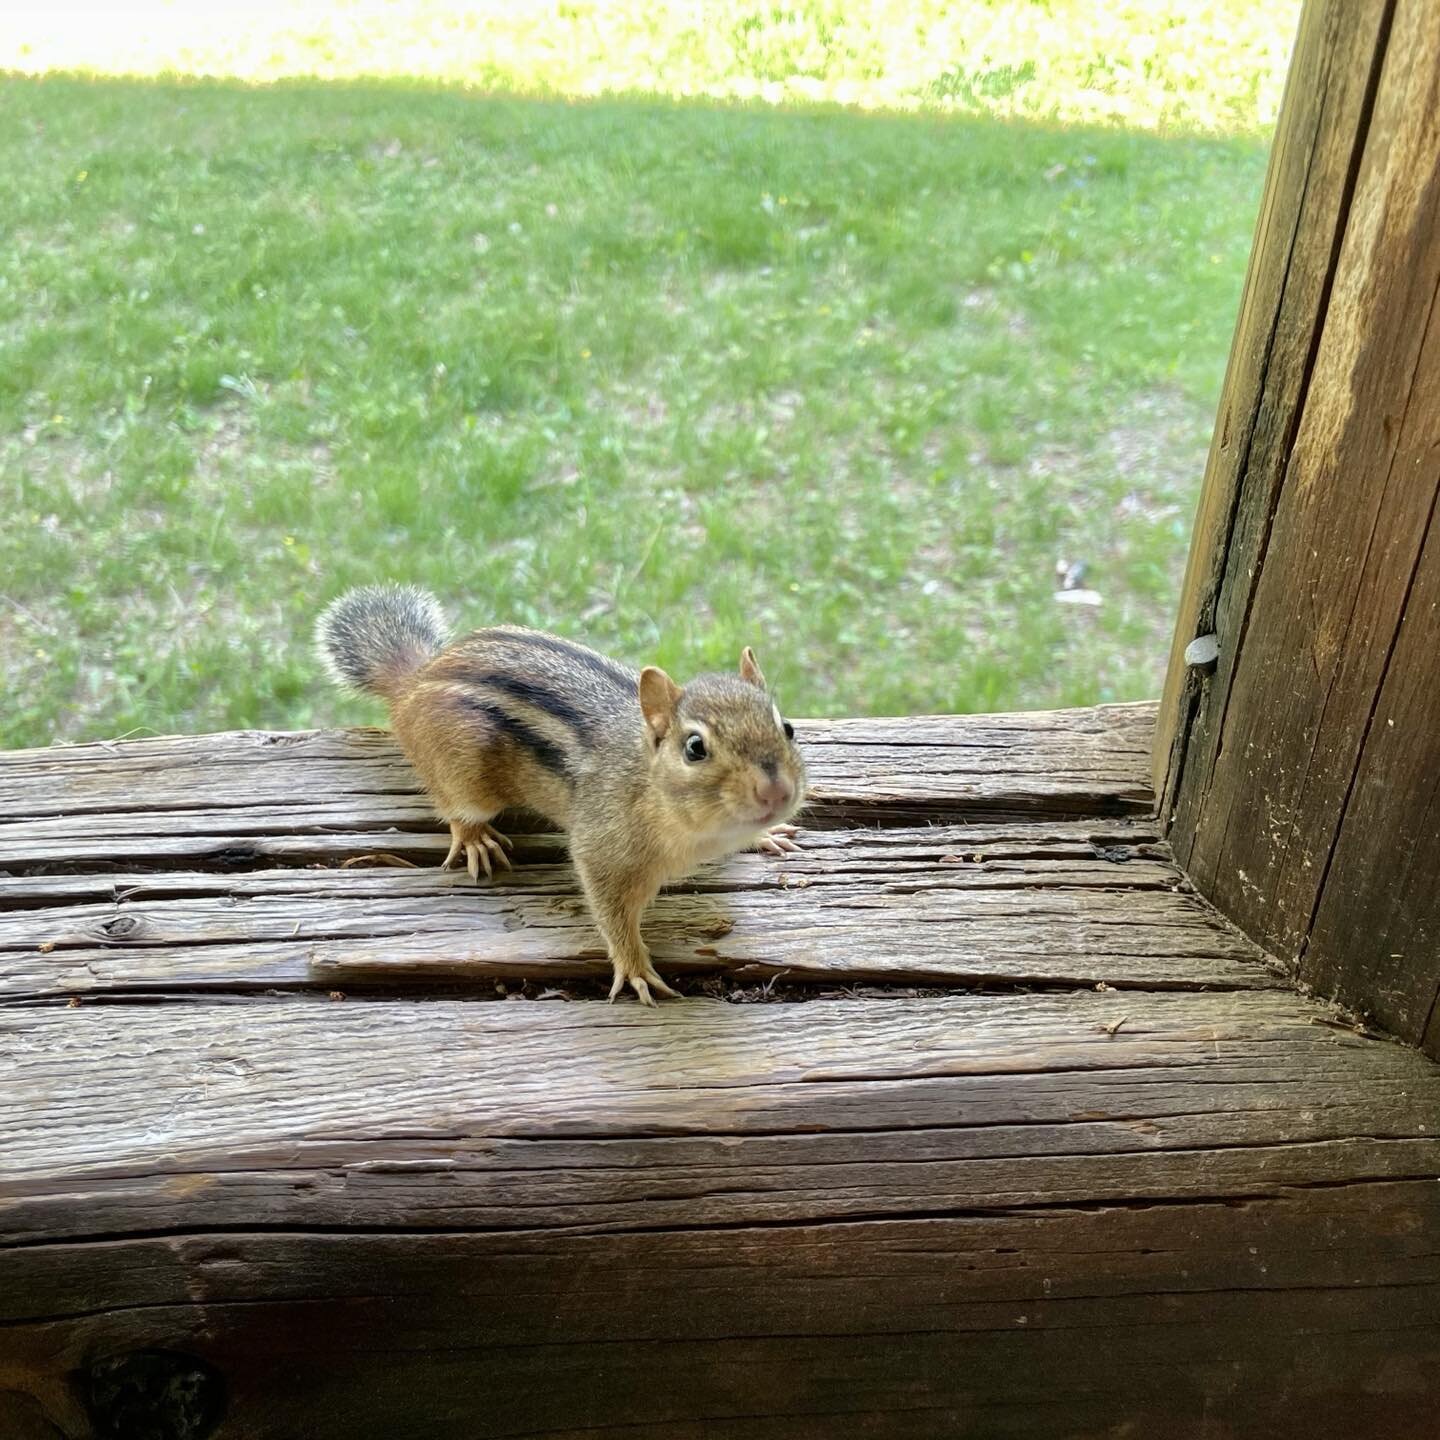 The absence of chipmunks this year has been a hot topic among neighbors on nextdoor. So it&rsquo;s good to know that this little ragamuffin has taken up residence under the porch.